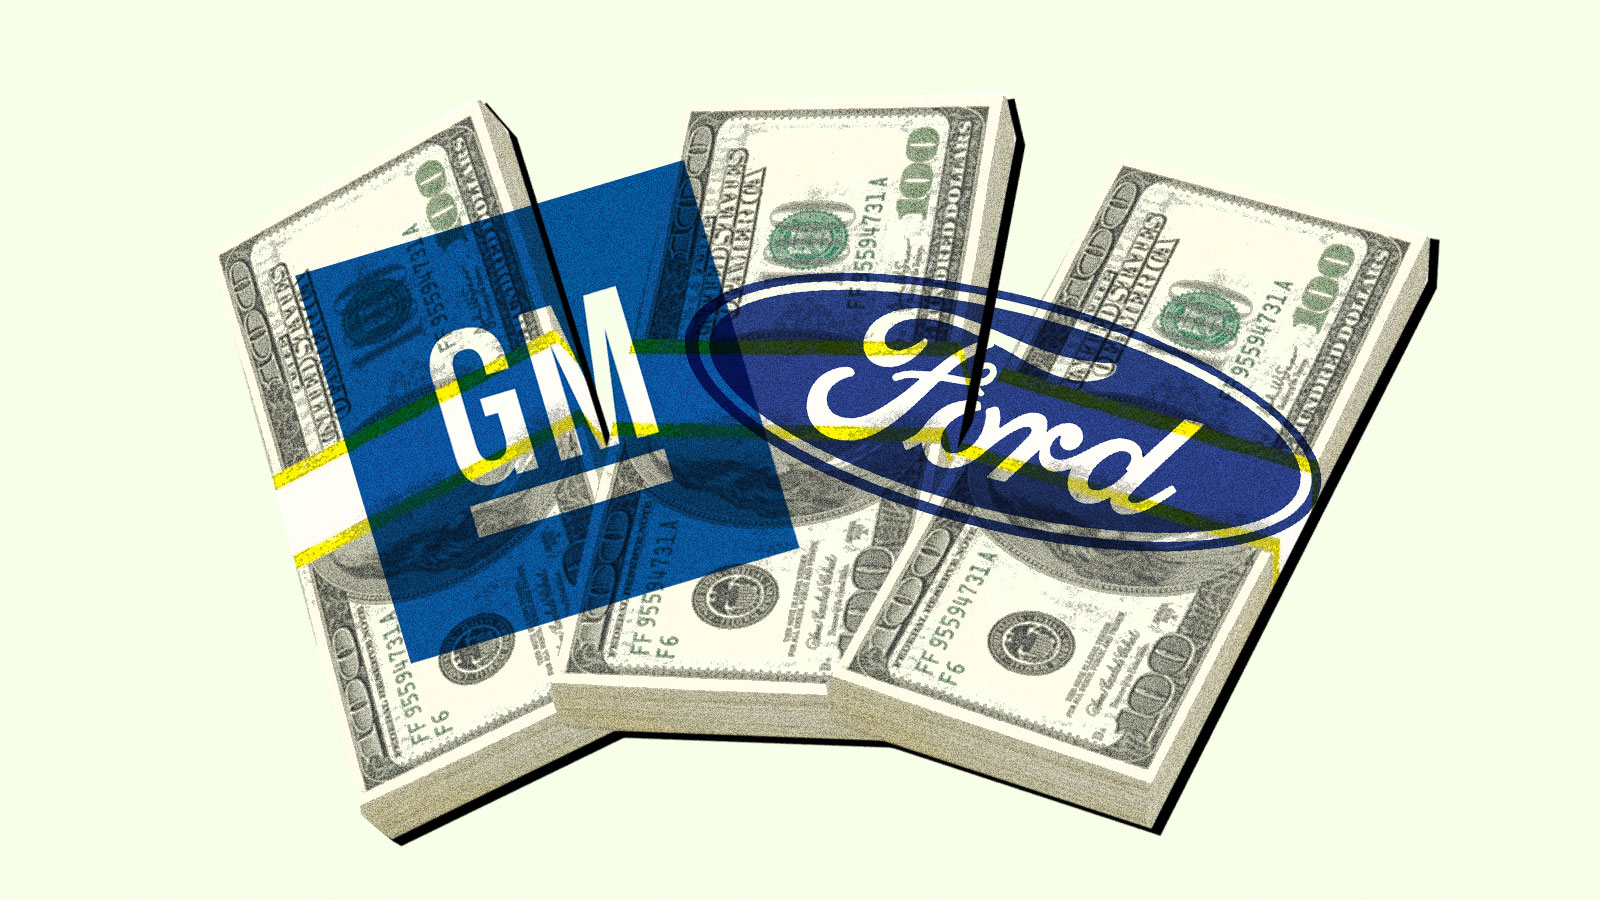 General Motors and Ford logos over a pile of money